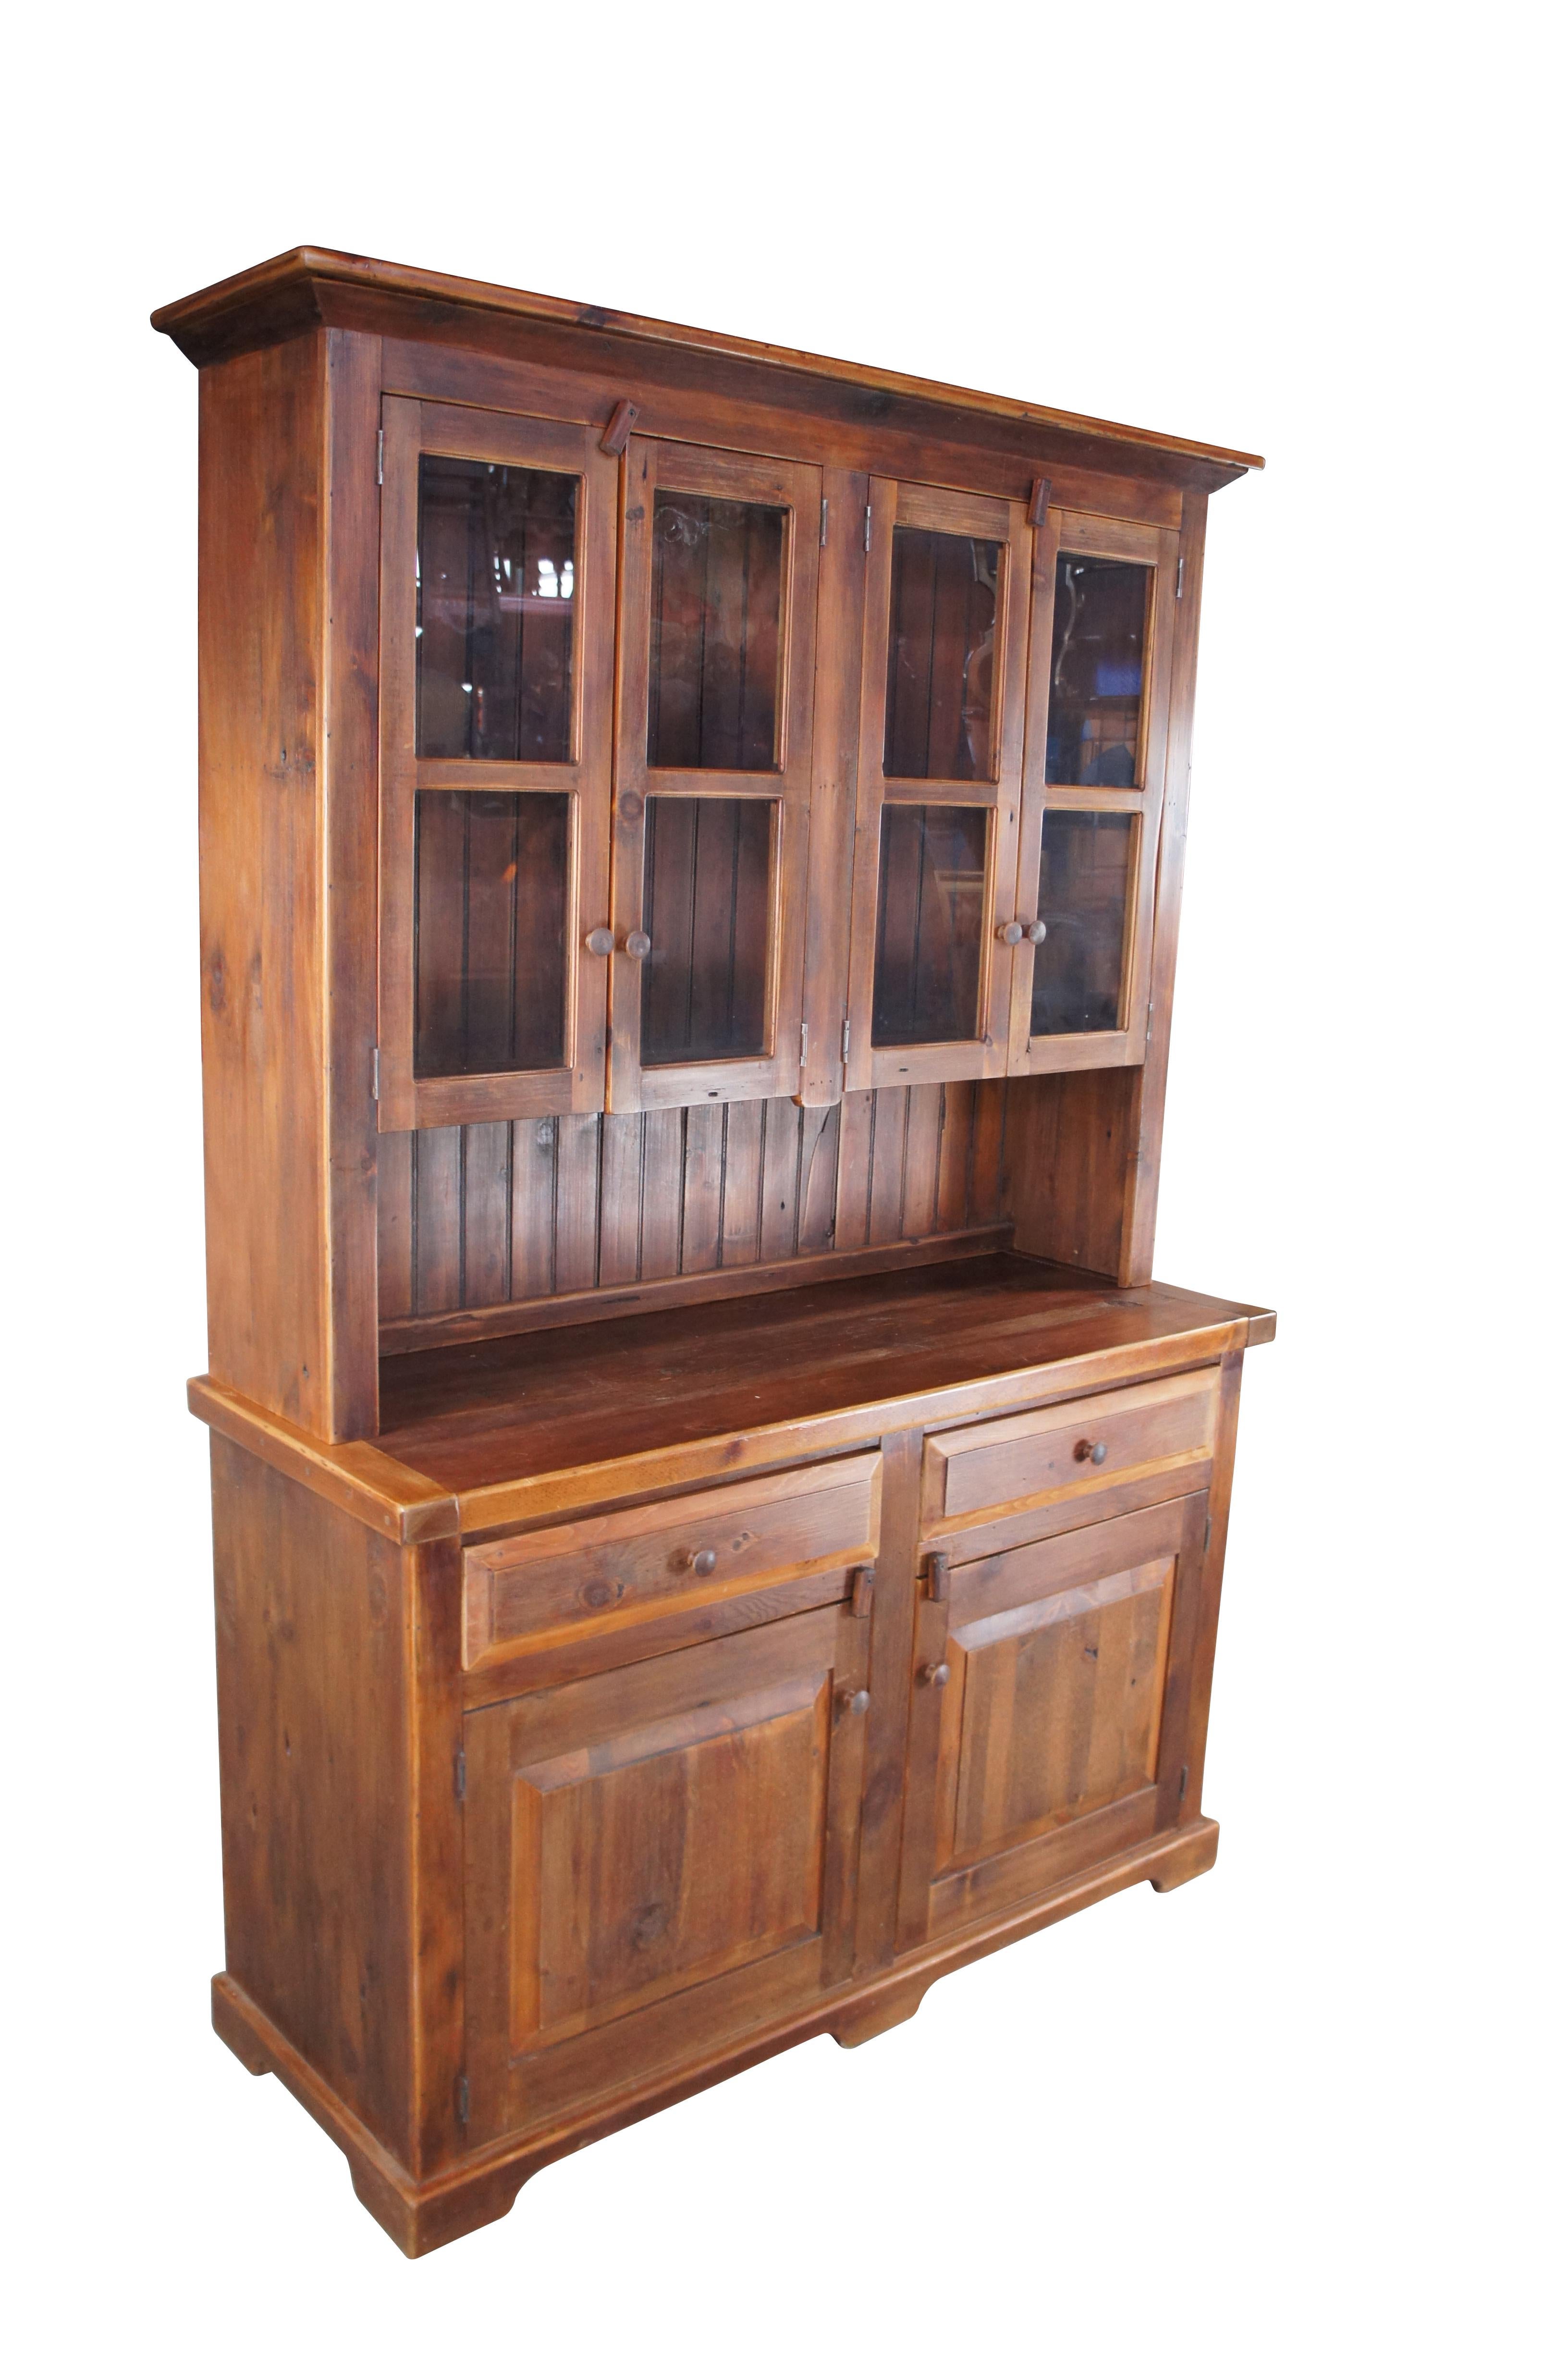 Vintage stepback cupboard in the manner of Pennsylvania Dutch. Made of pine featuring early American styling with upper curio display over two drawers and lower storage cabinet. 

Dimensions:
54